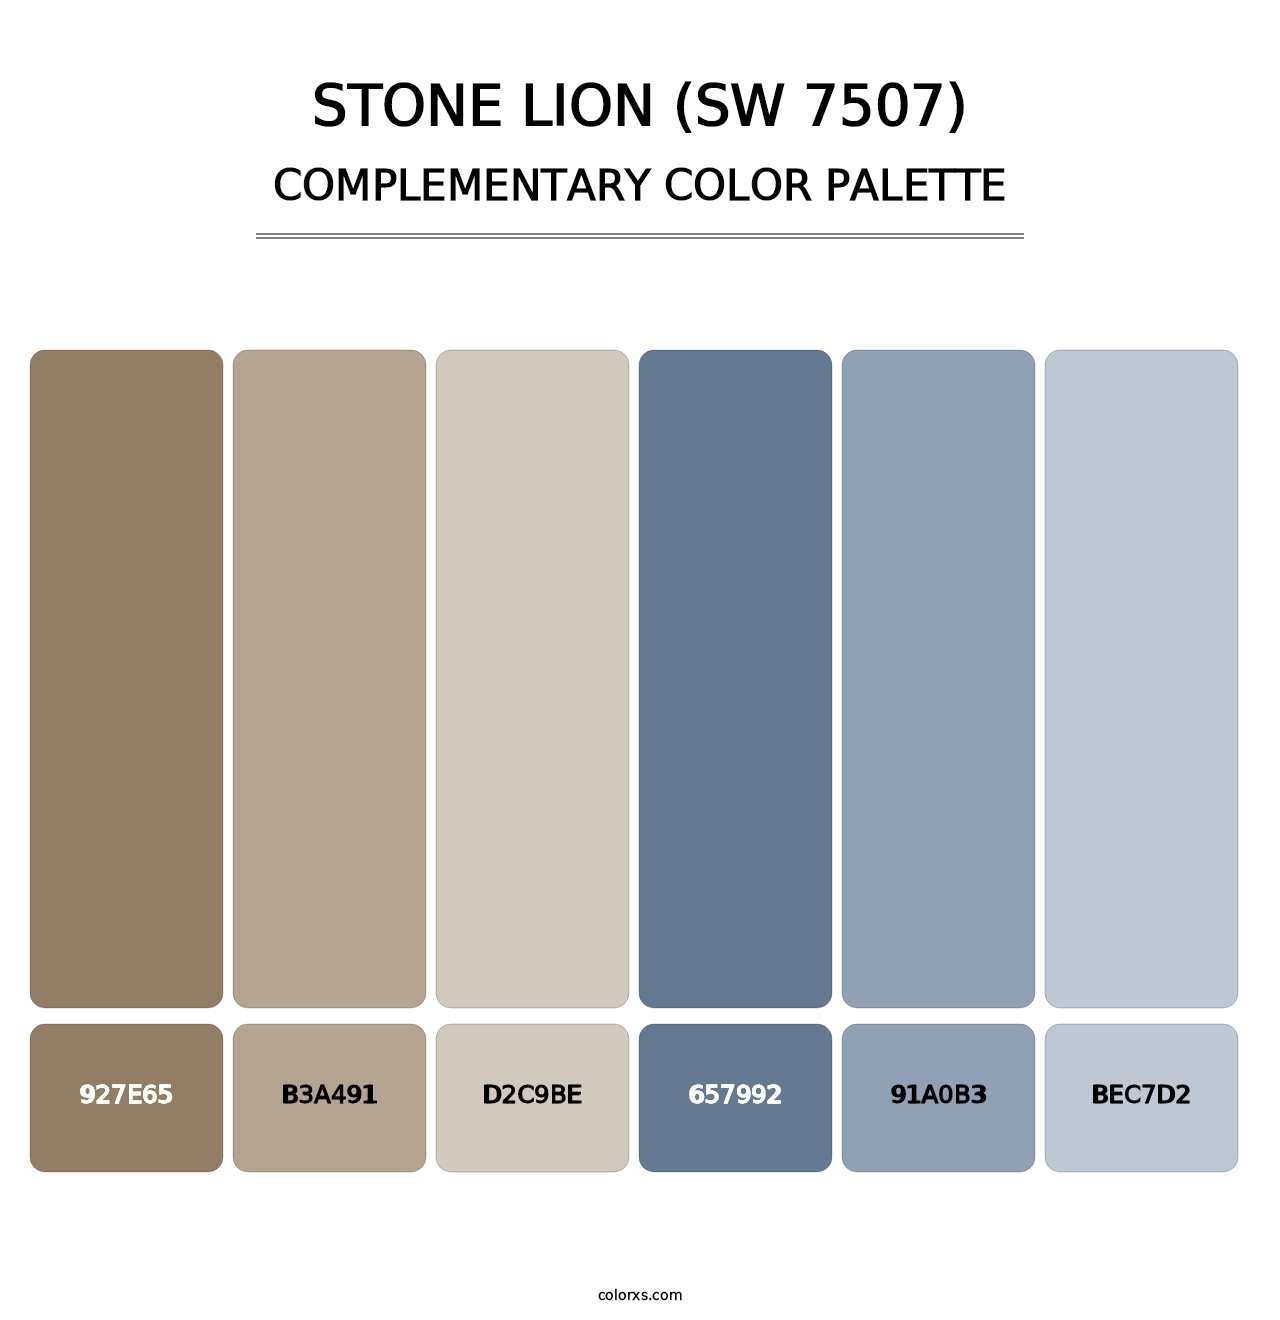 Stone Lion (SW 7507) - Complementary Color Palette